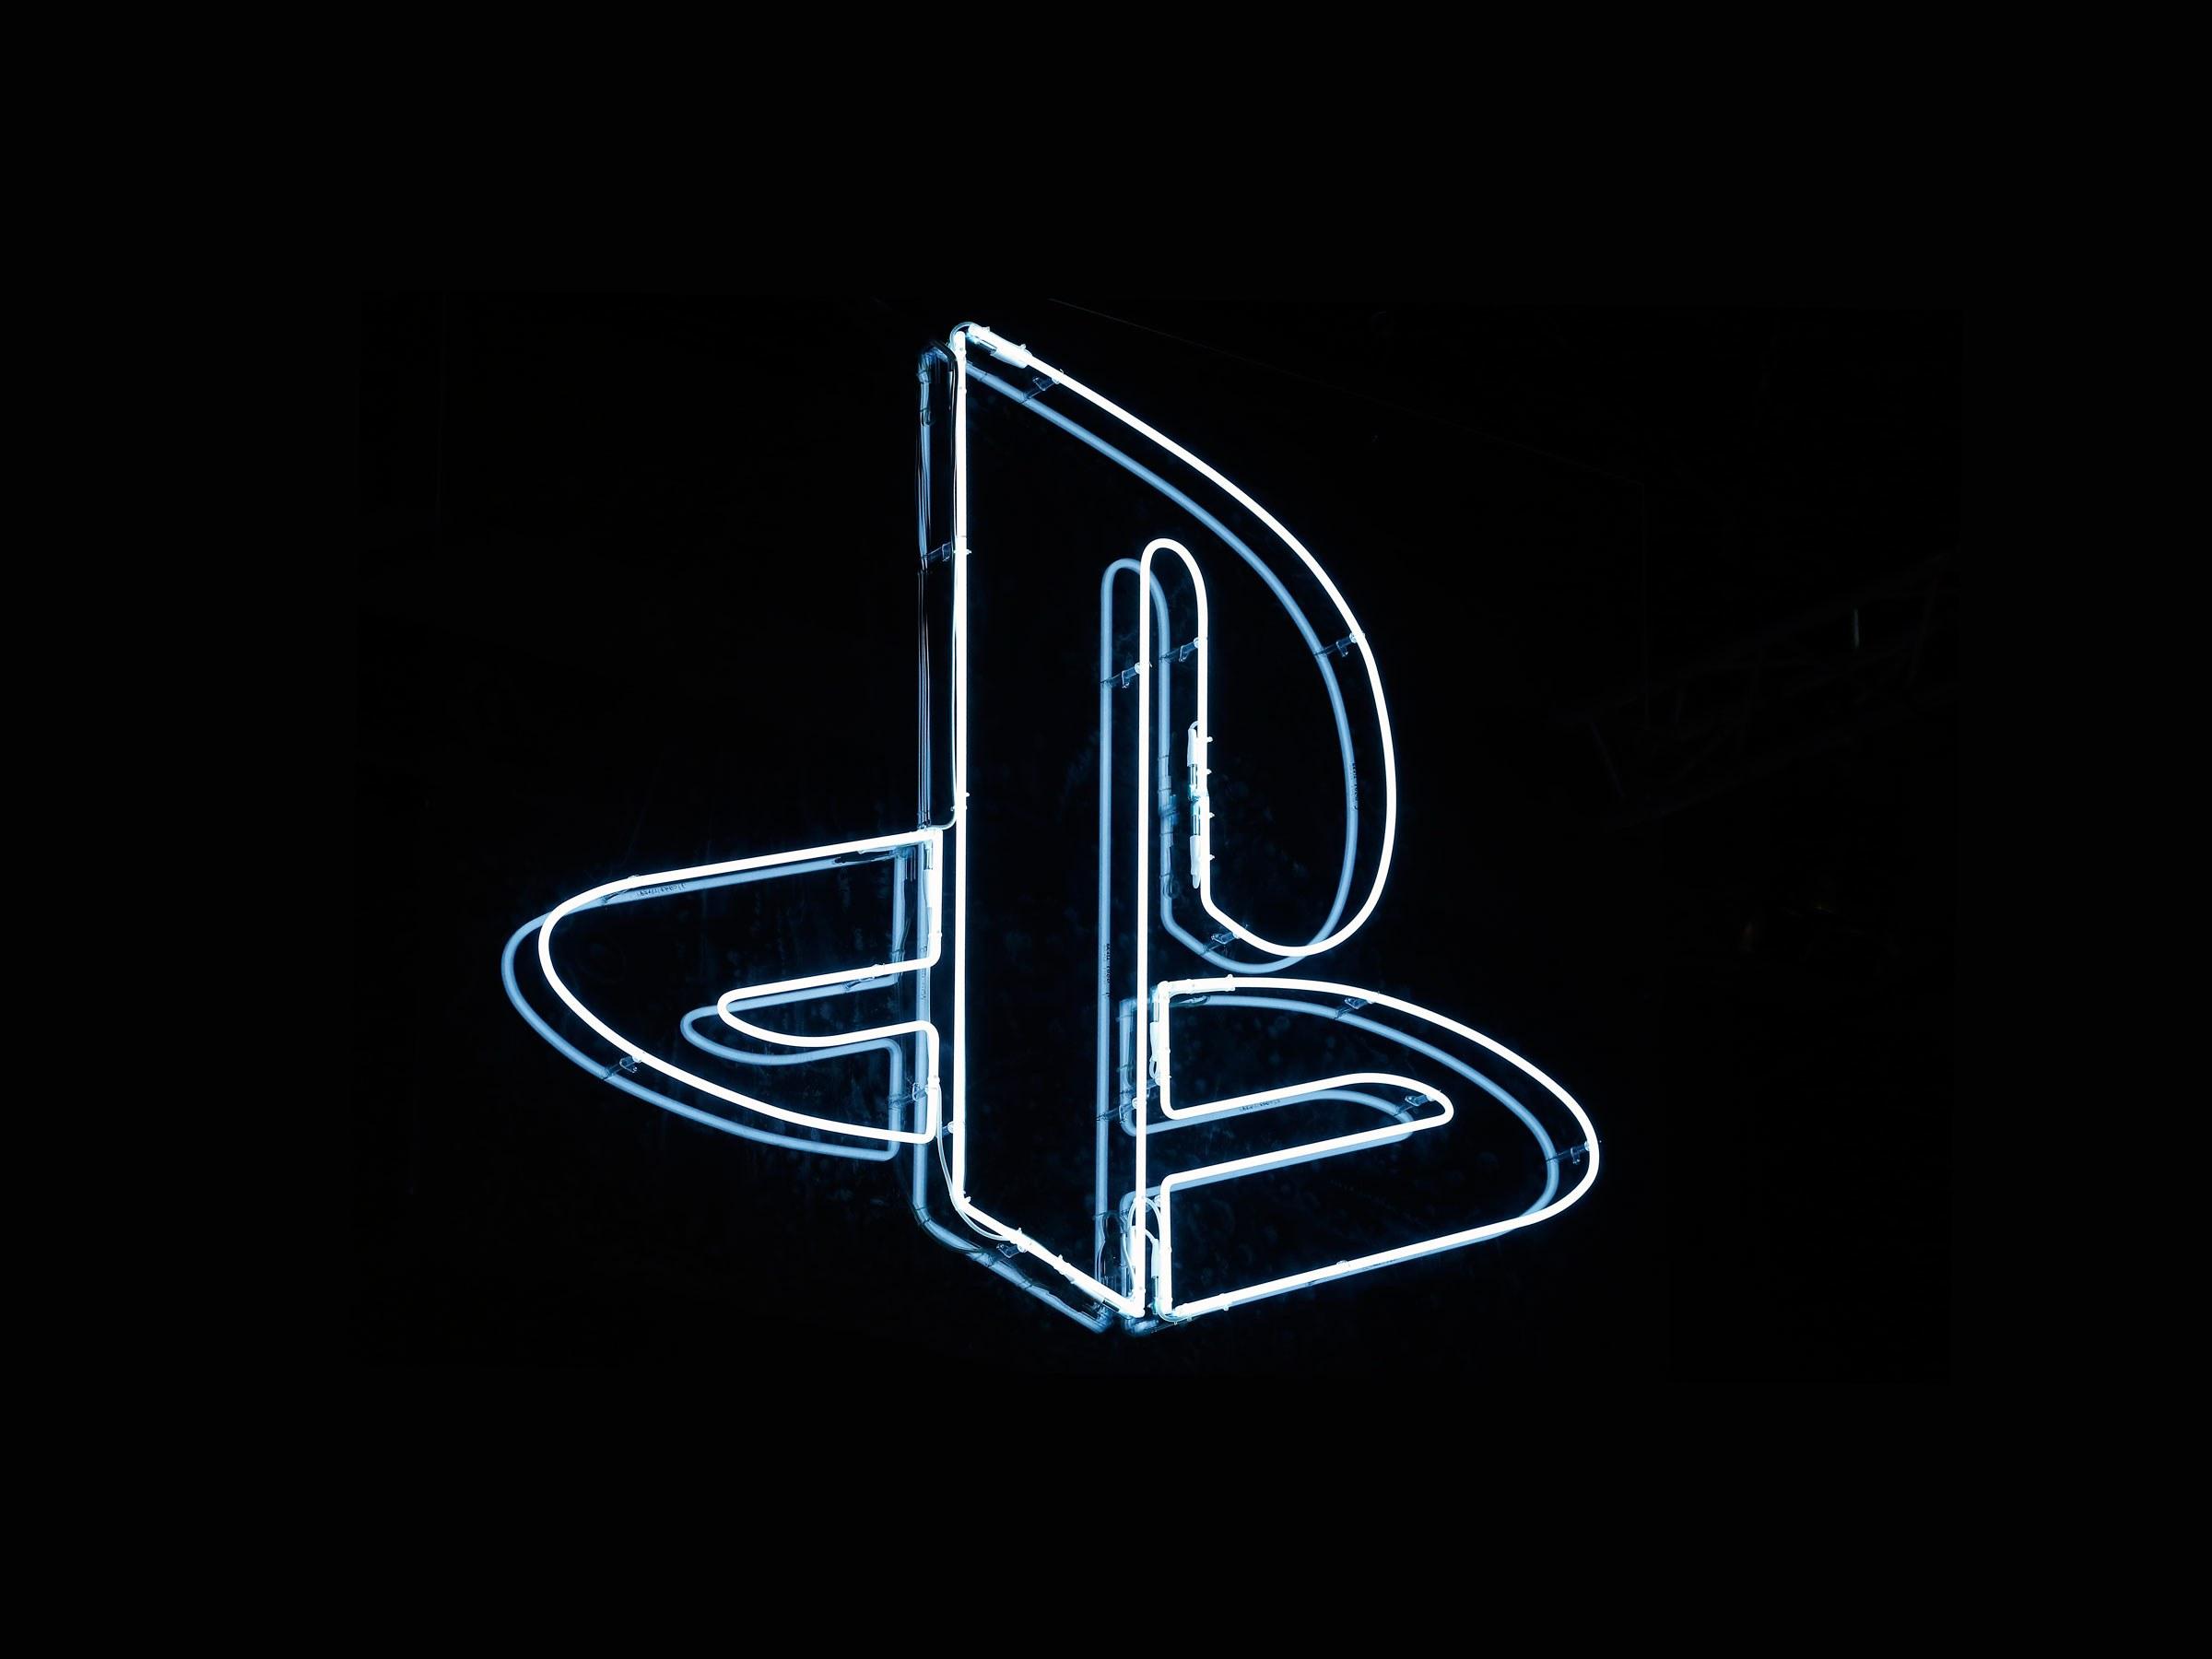 Sony PlayStation 5 coming Holday 2020